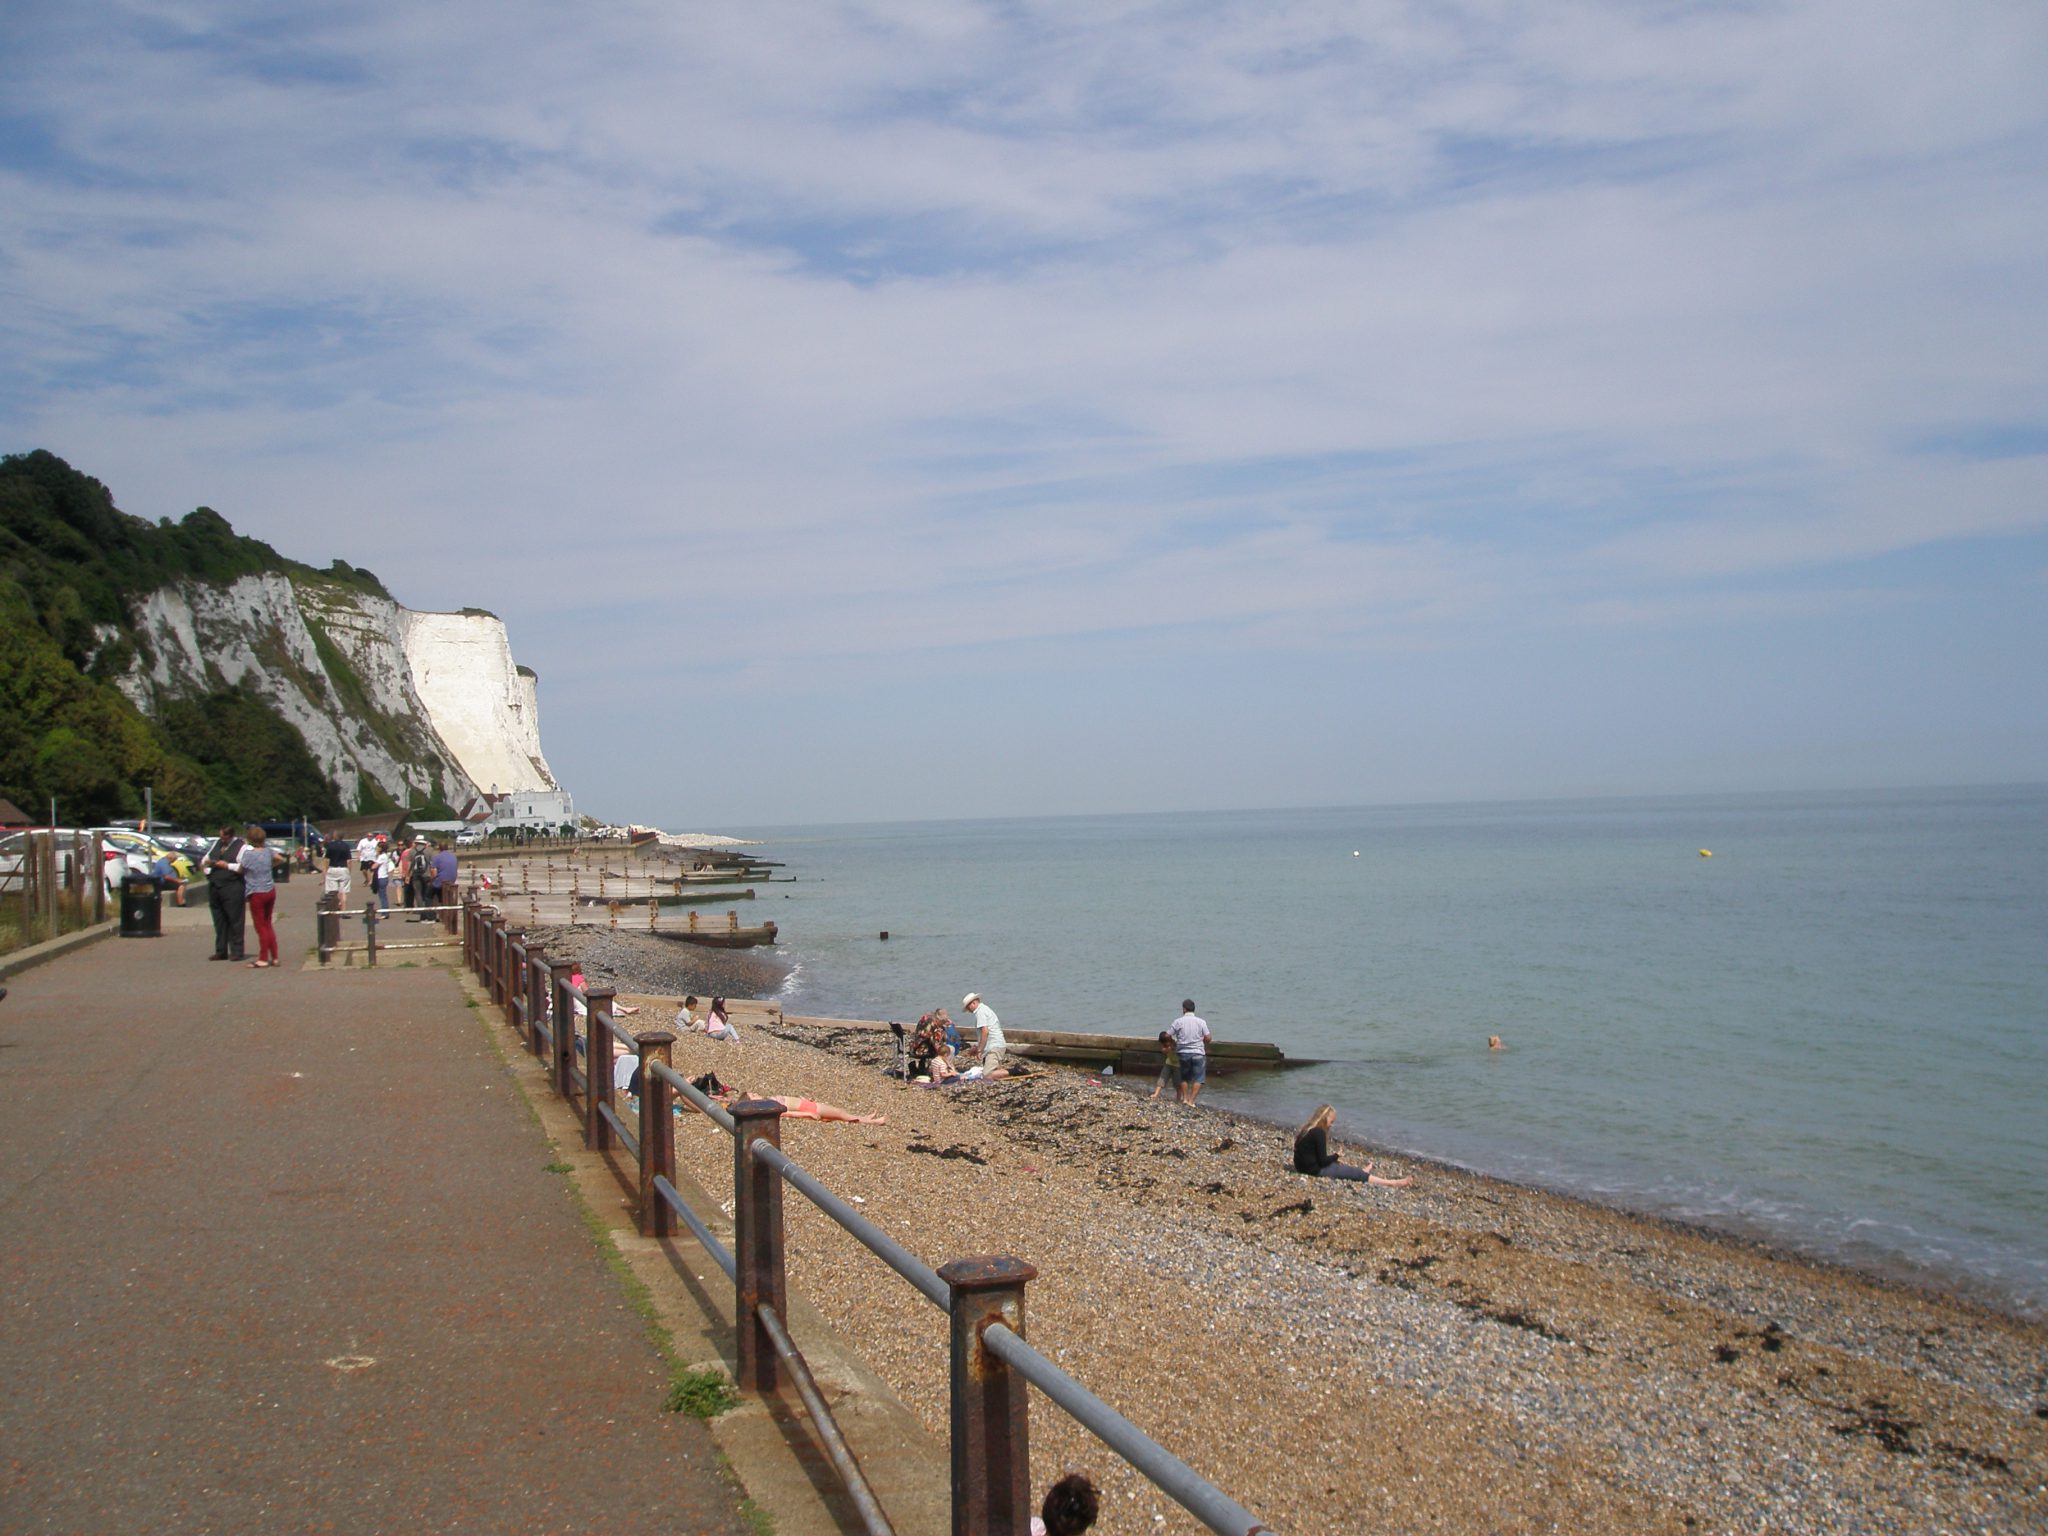 We then walked in the opposite direction, along the shingle beach.